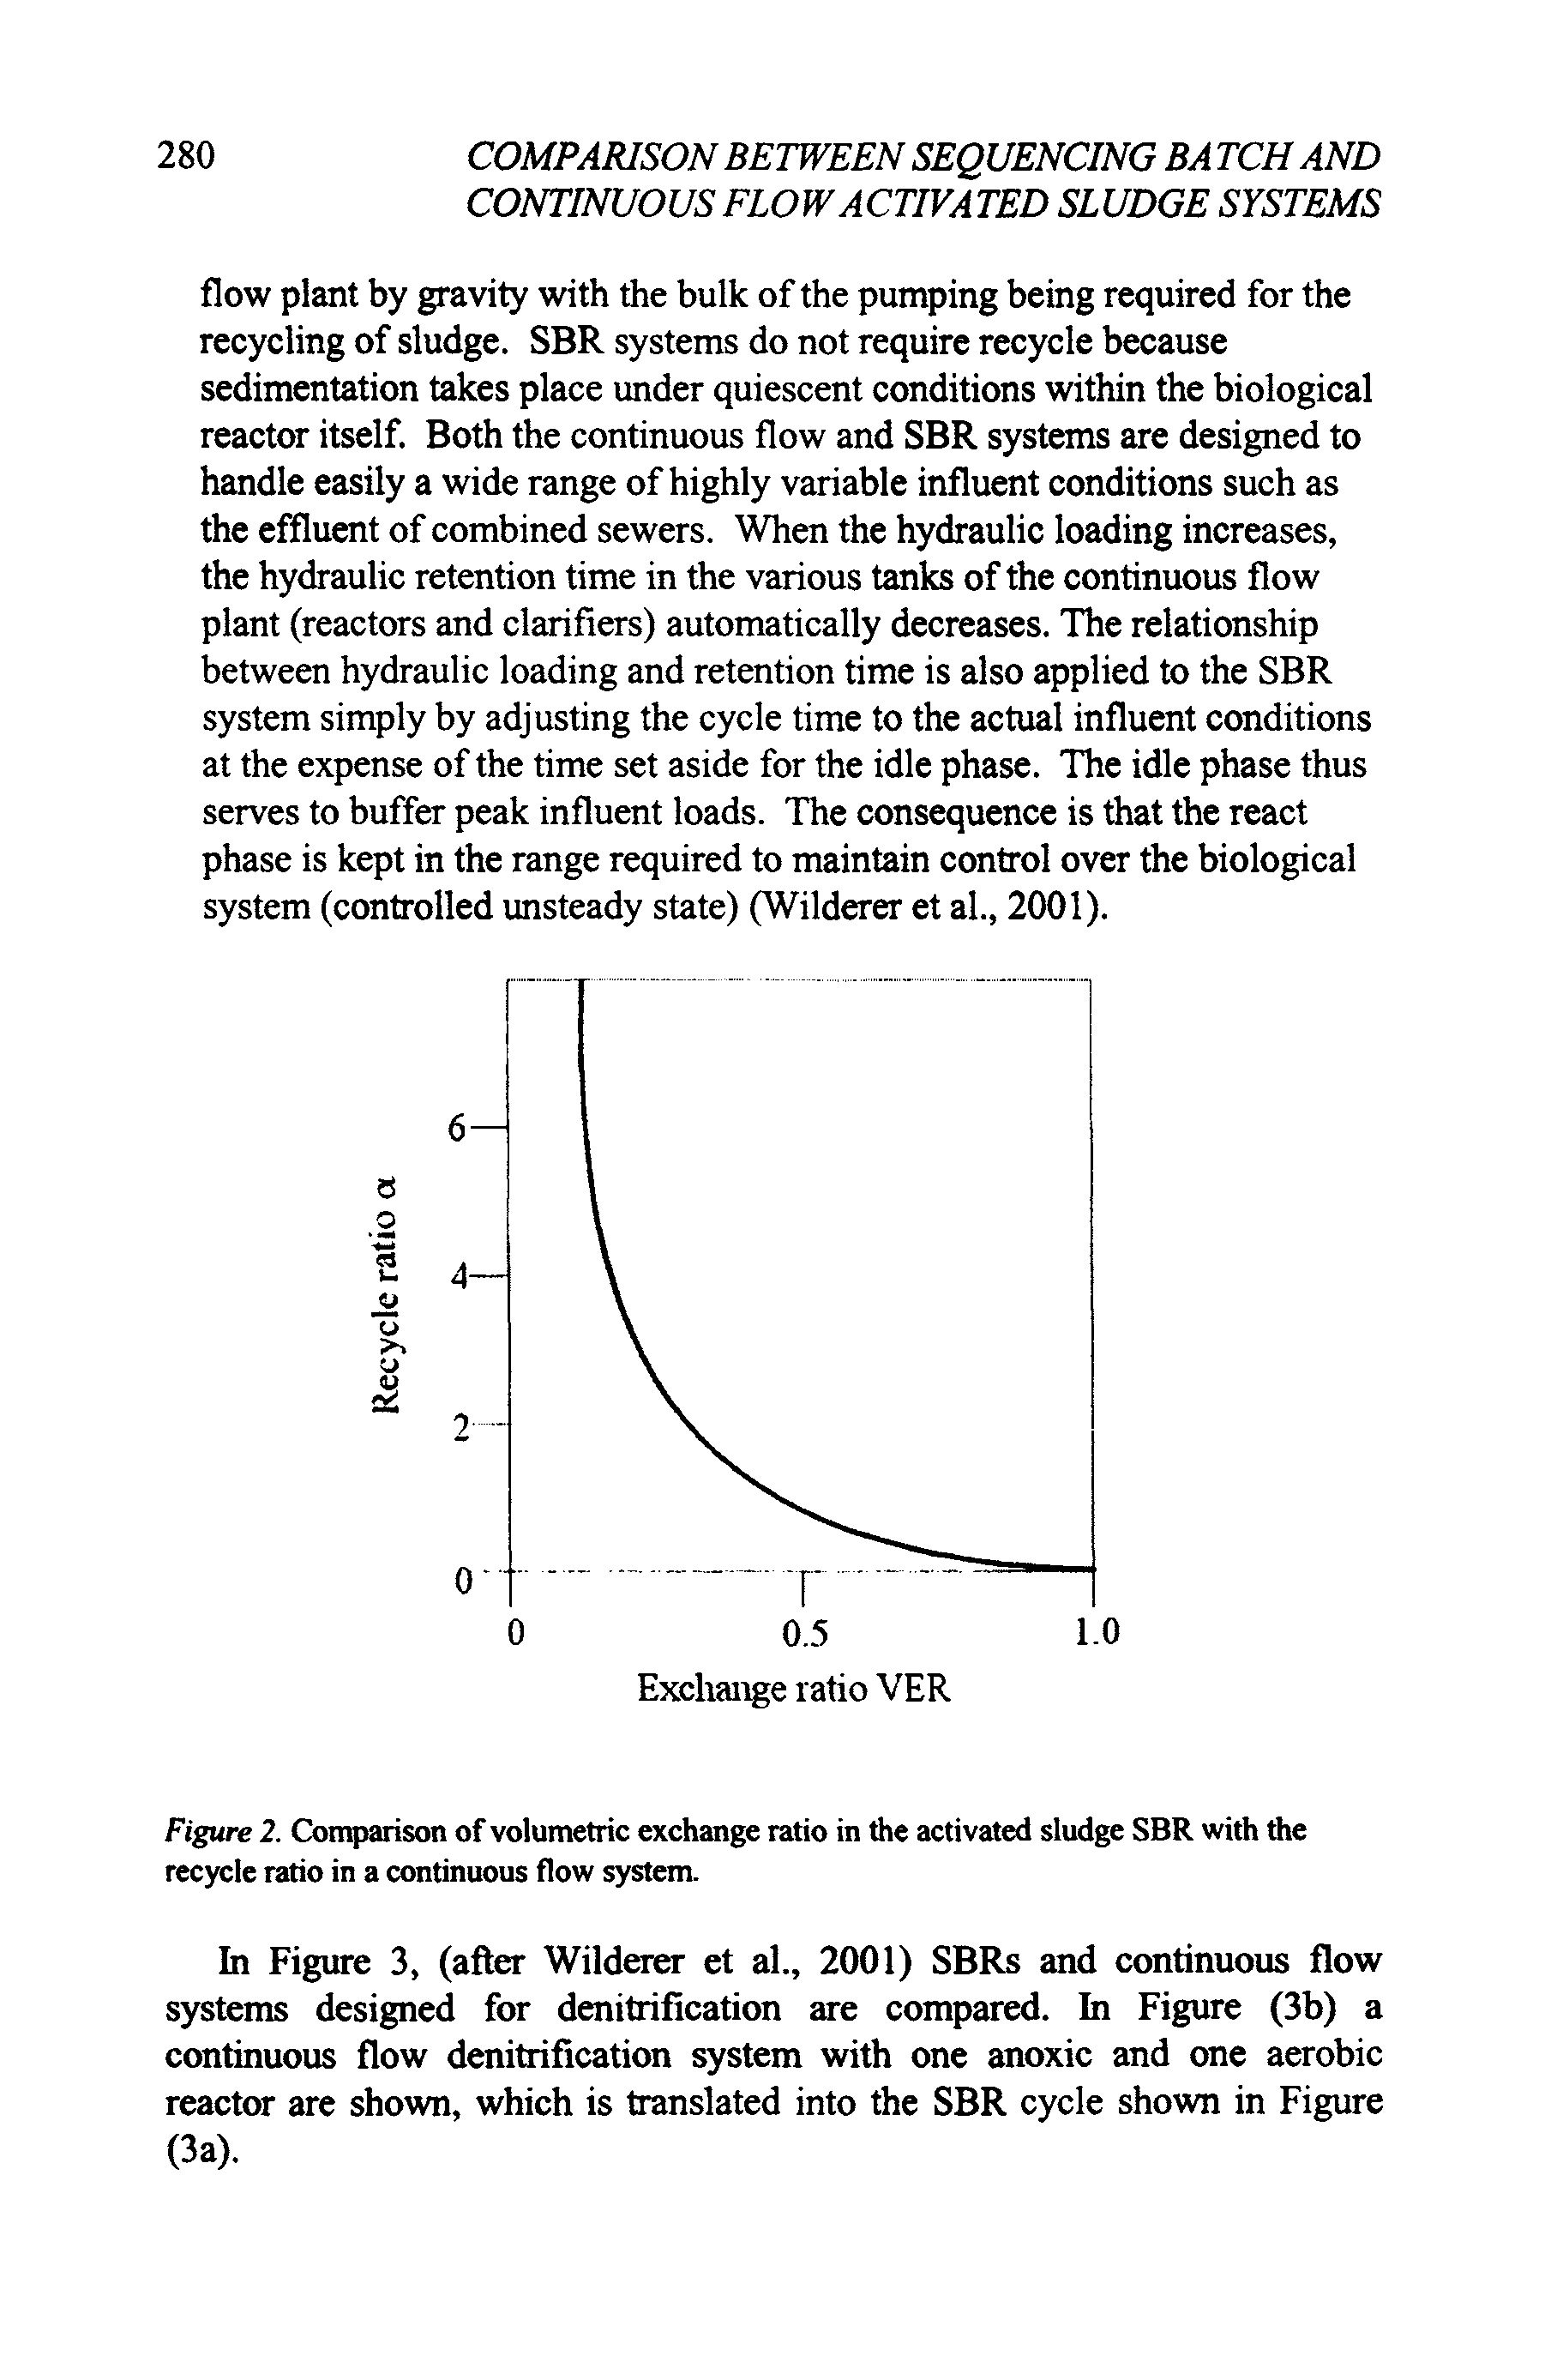 Figure 2. Comparison of volumetric exchange ratio in the activated sludge SBR with the recycle ratio in a continuous flow system.